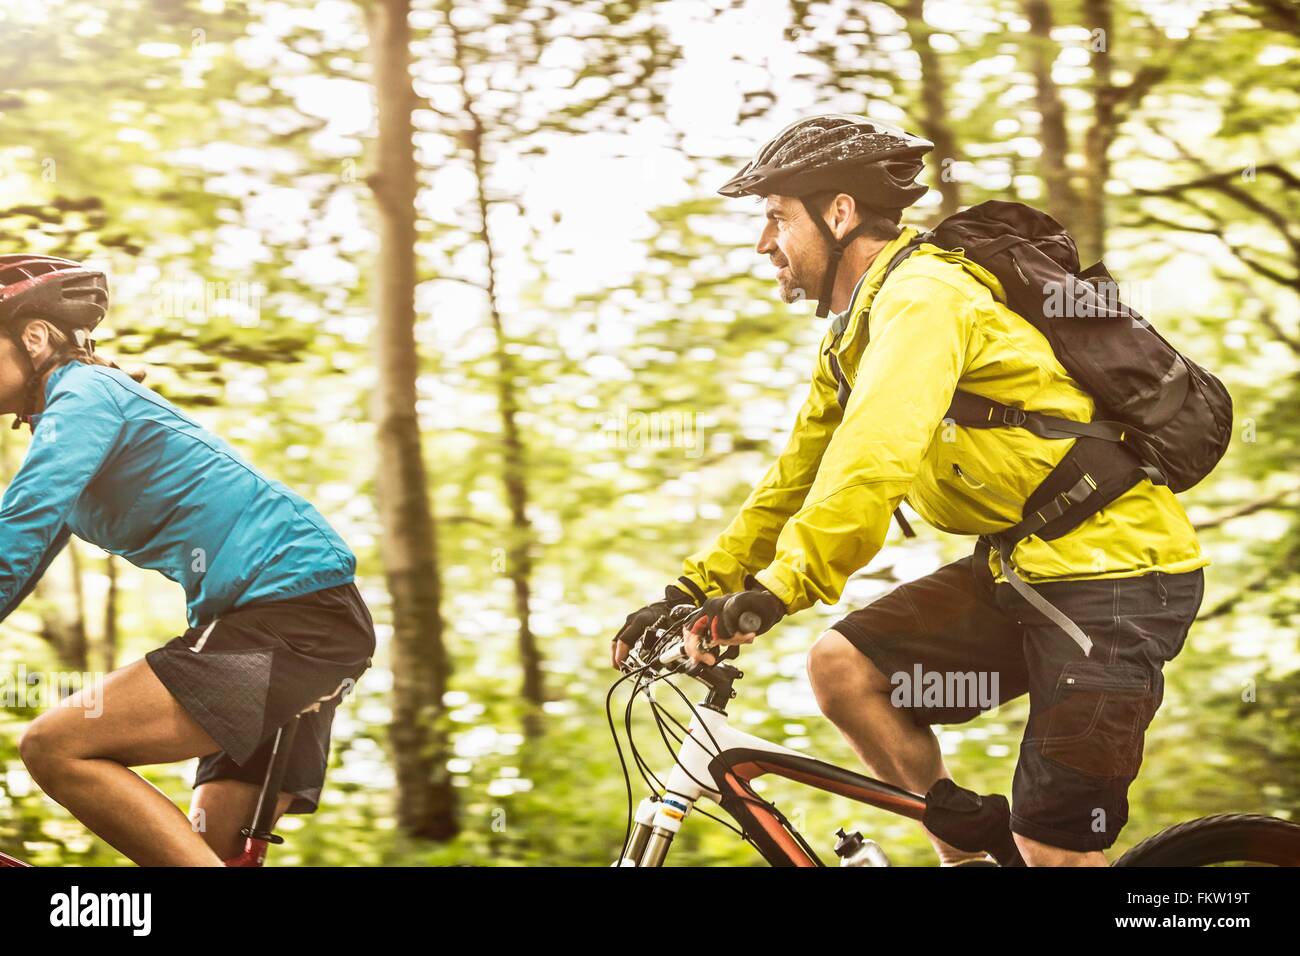 Mature mountain biking couple speed cycling in forest Stock Photo